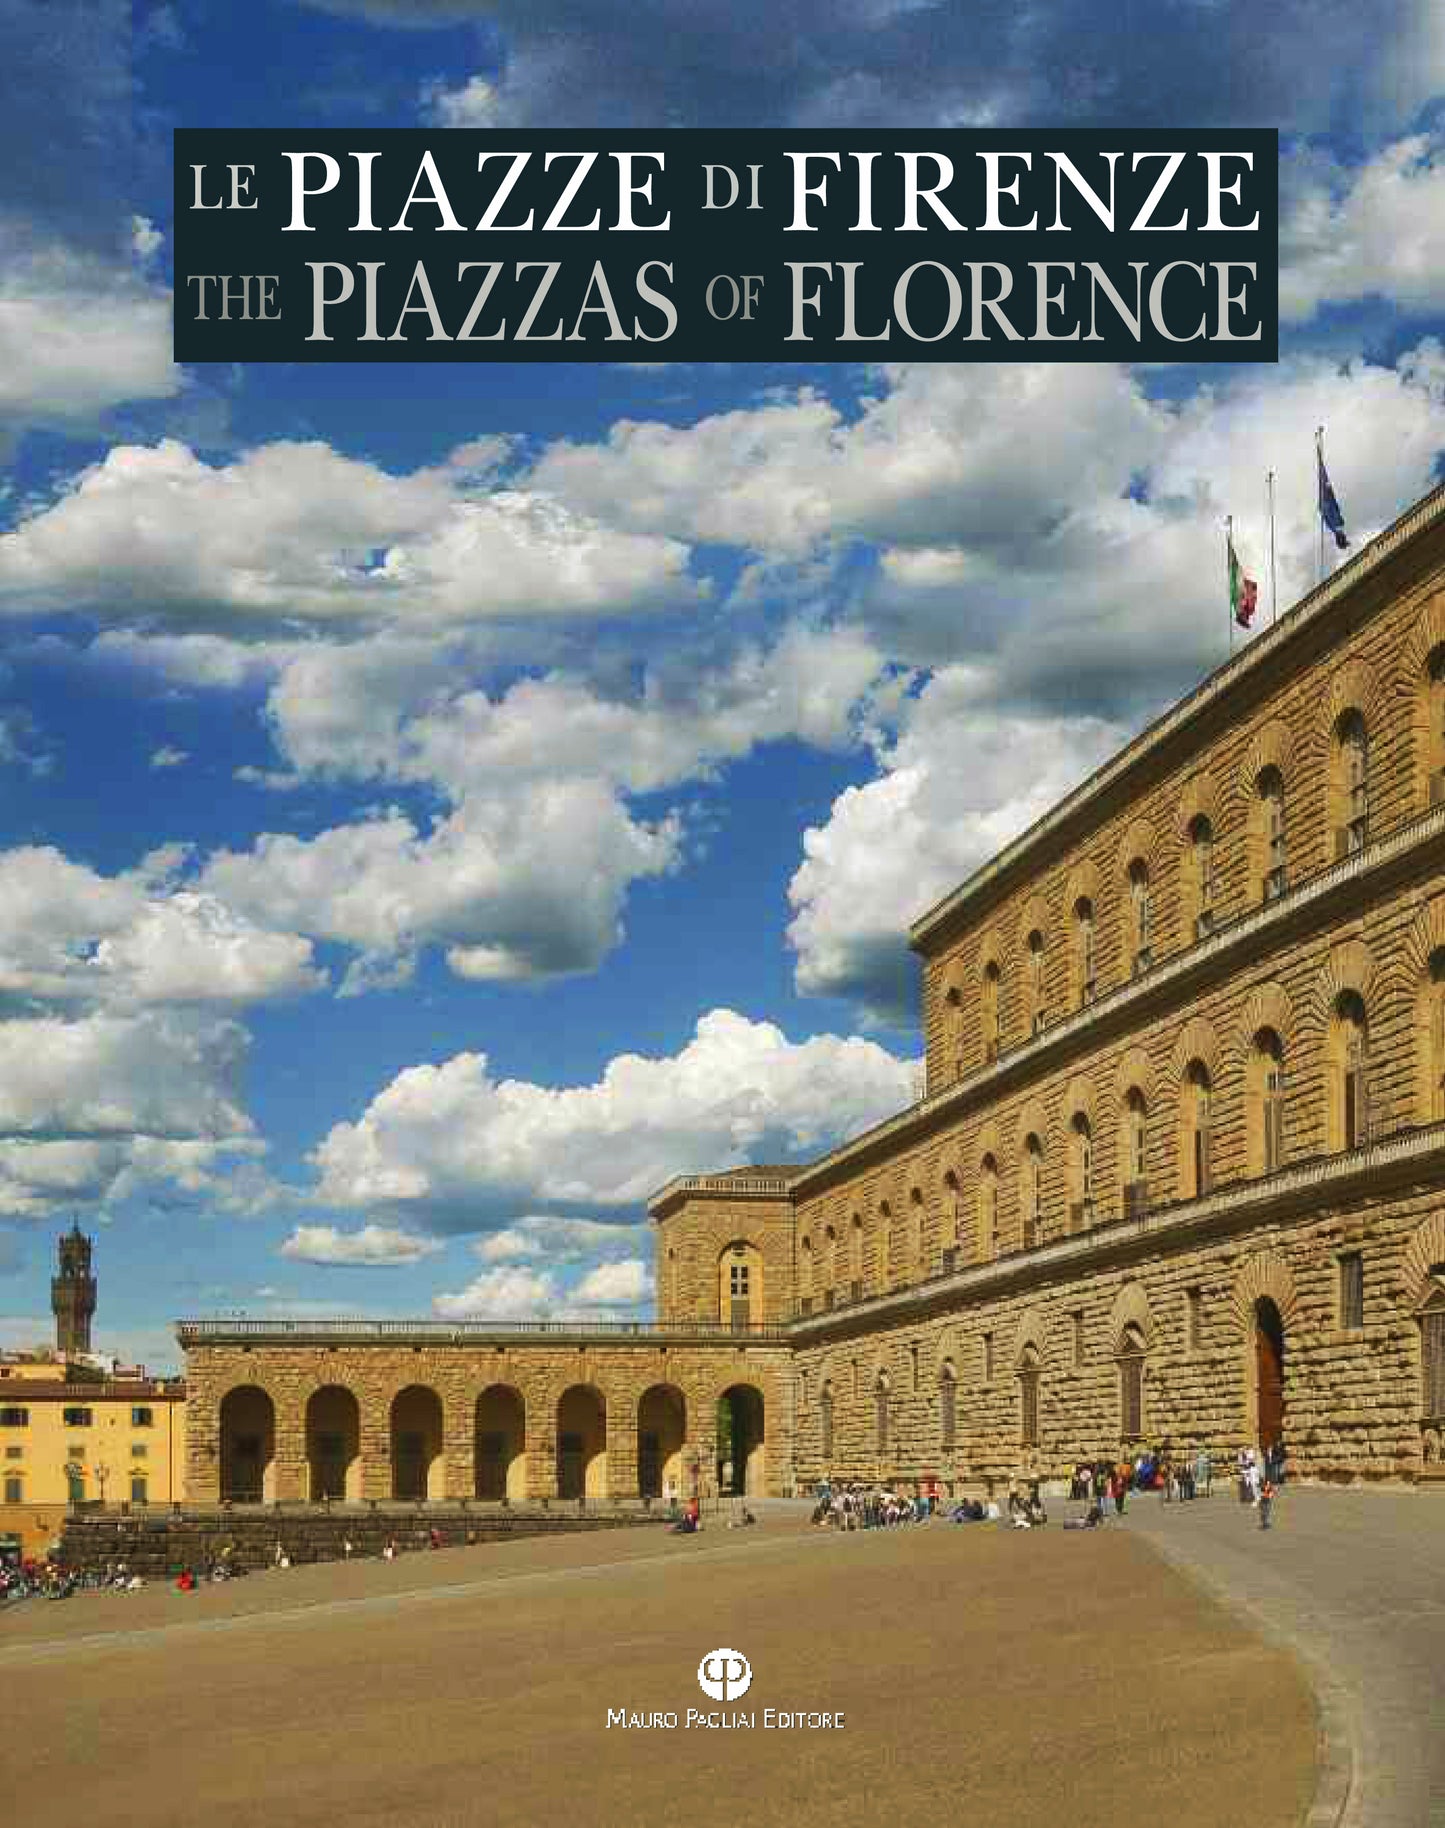 The Piazzas of Florence